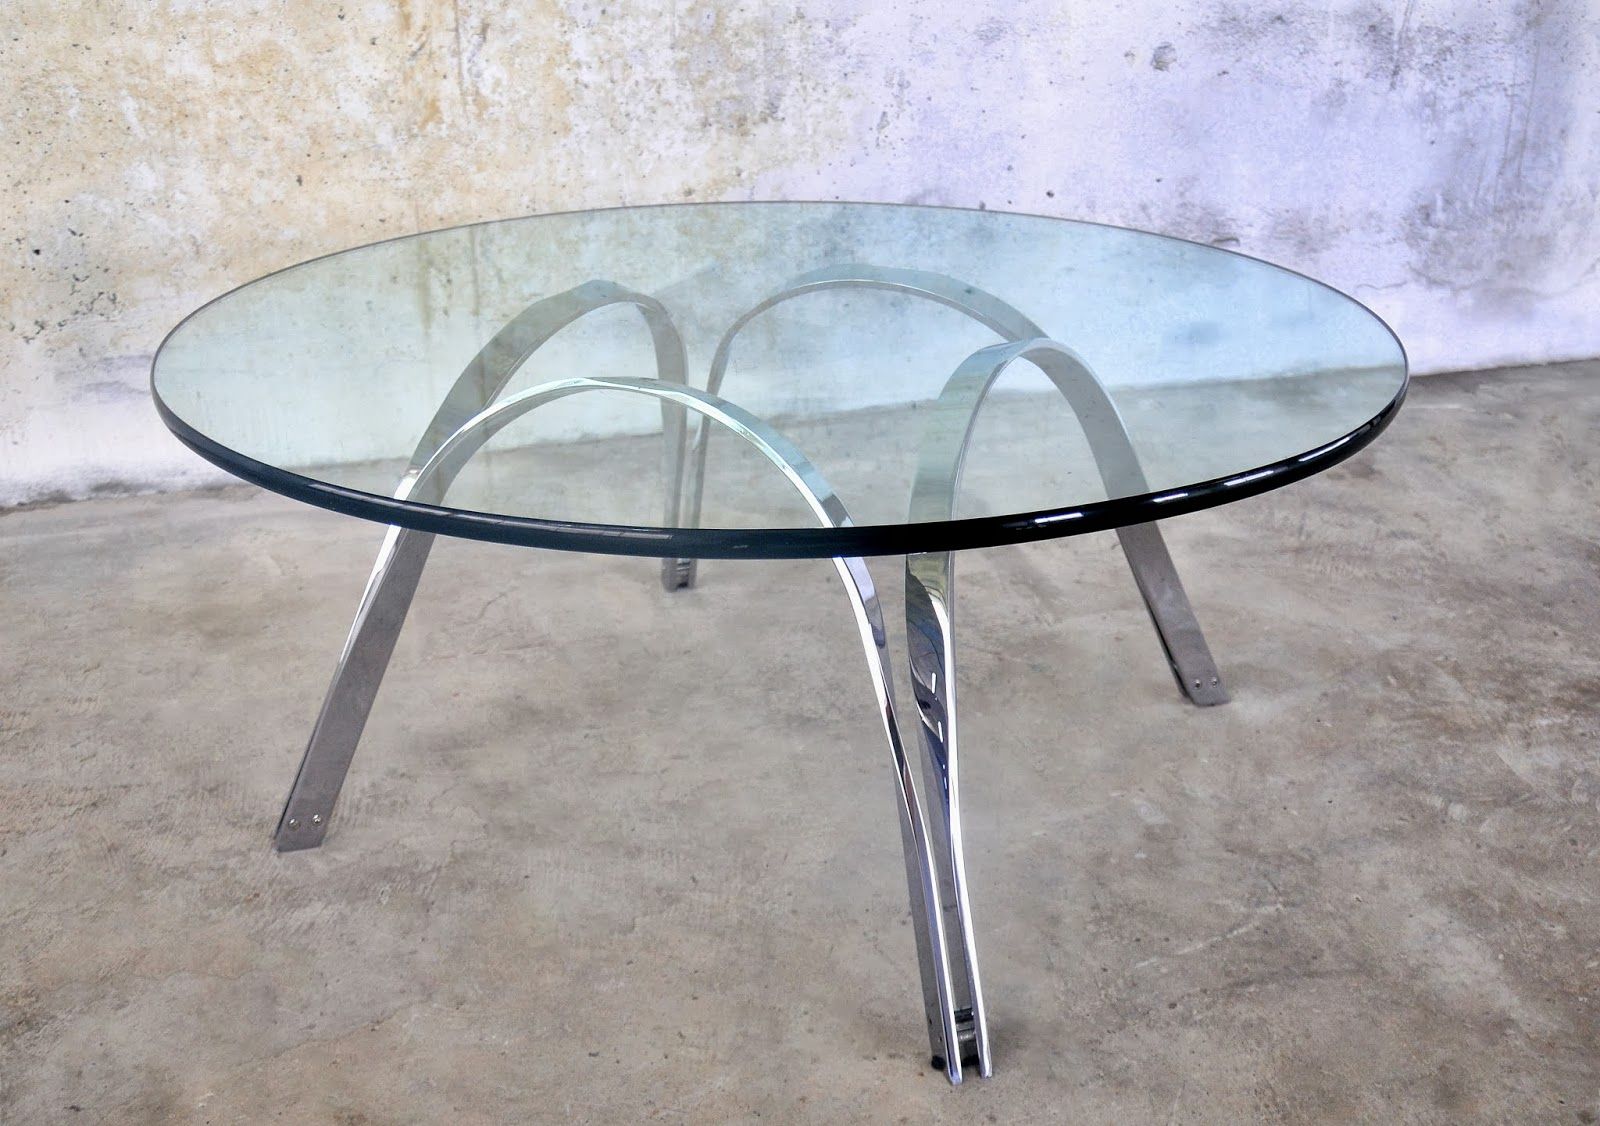 Best And Newest Polished Chrome Round Cocktail Tables Inside Select Modern: Roger Sprunger Chrome & Glass Coffee Or Cocktail Table (View 6 of 10)